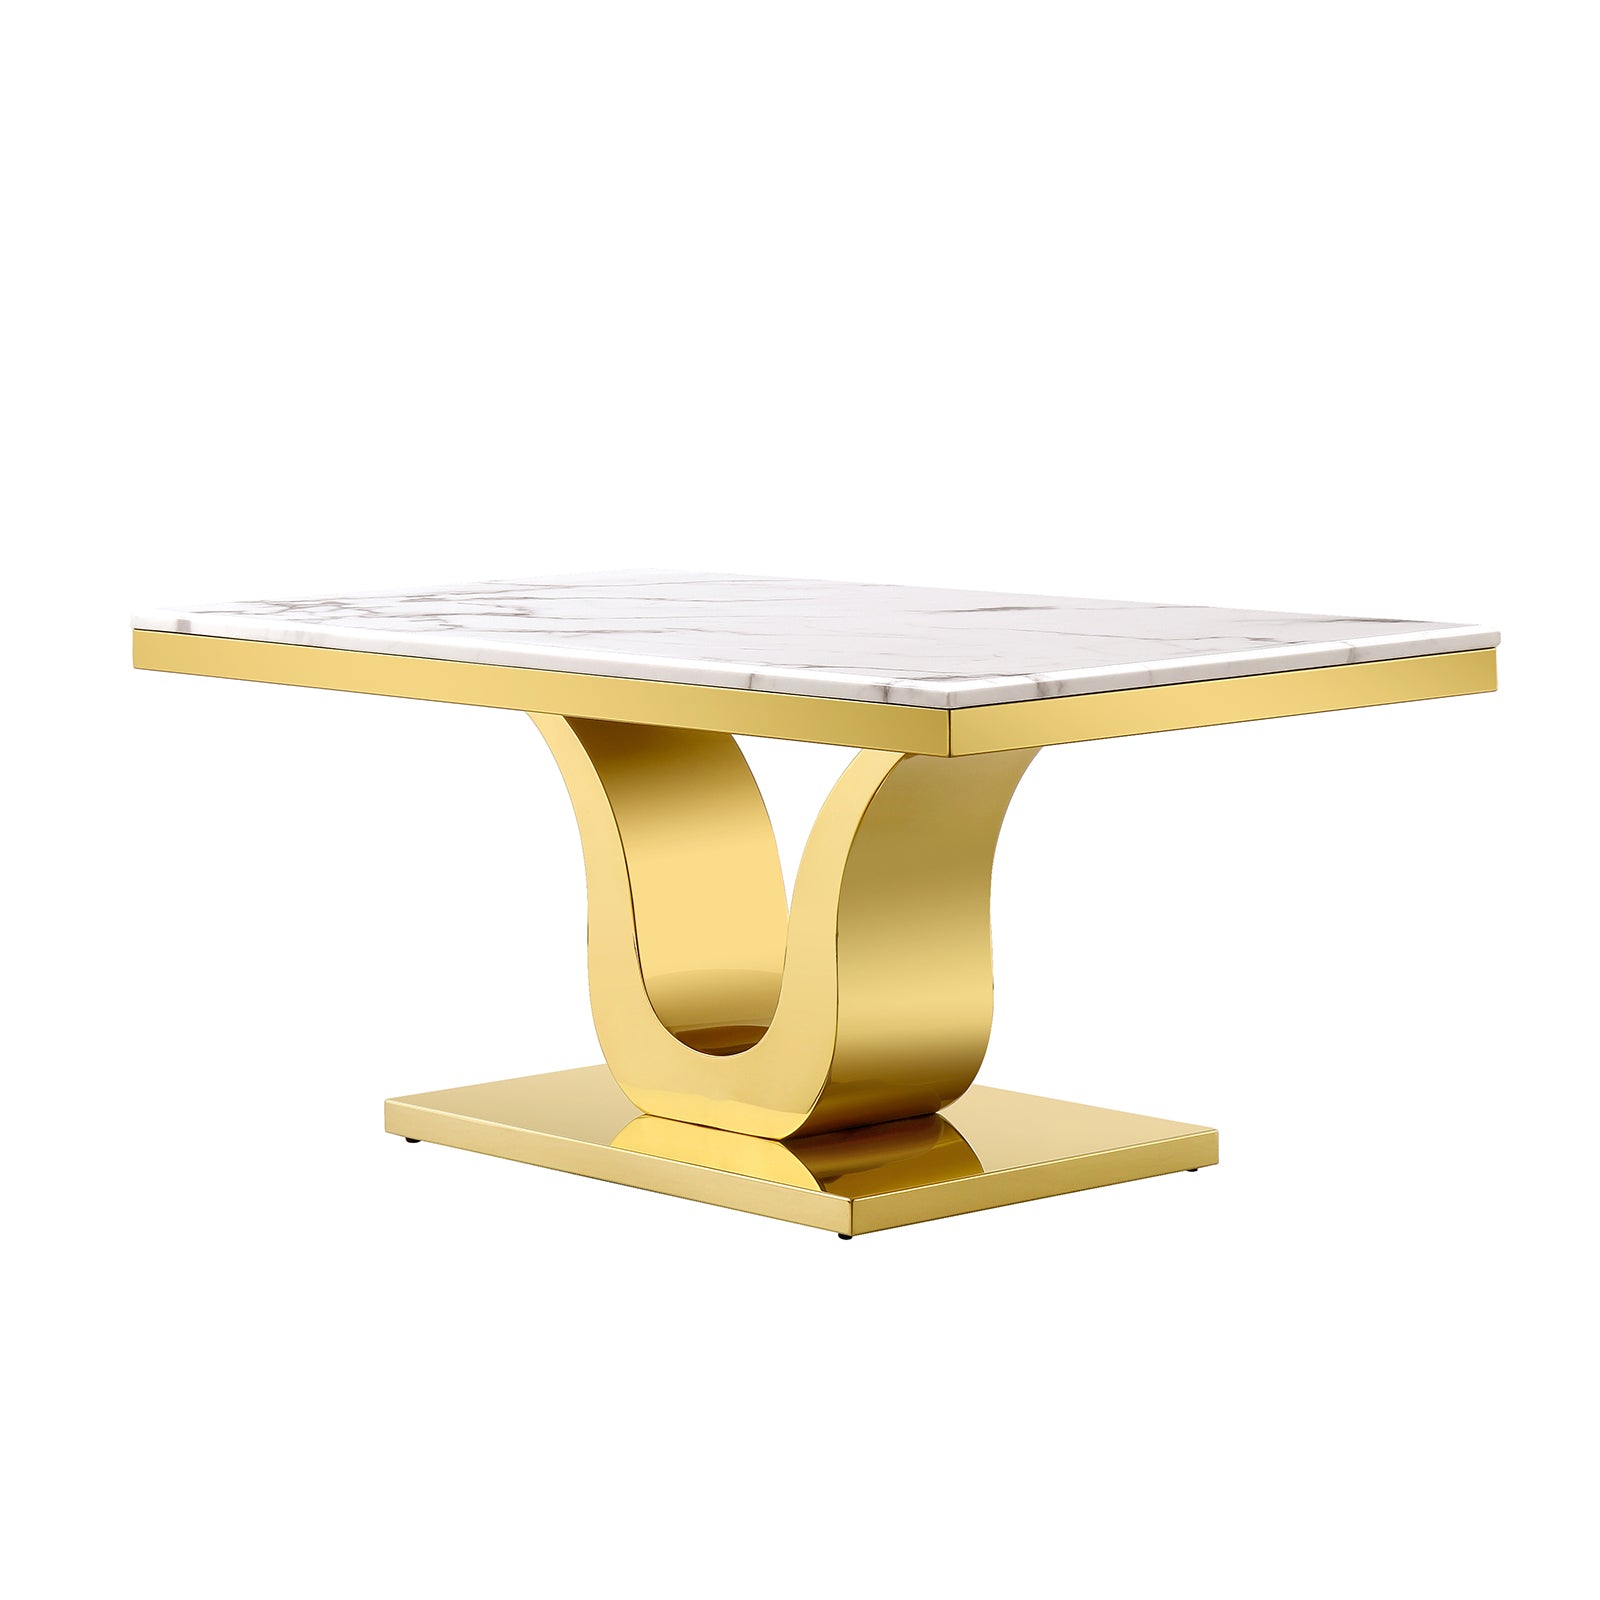 White and Gold Living room table Set | Metal U Base | L212